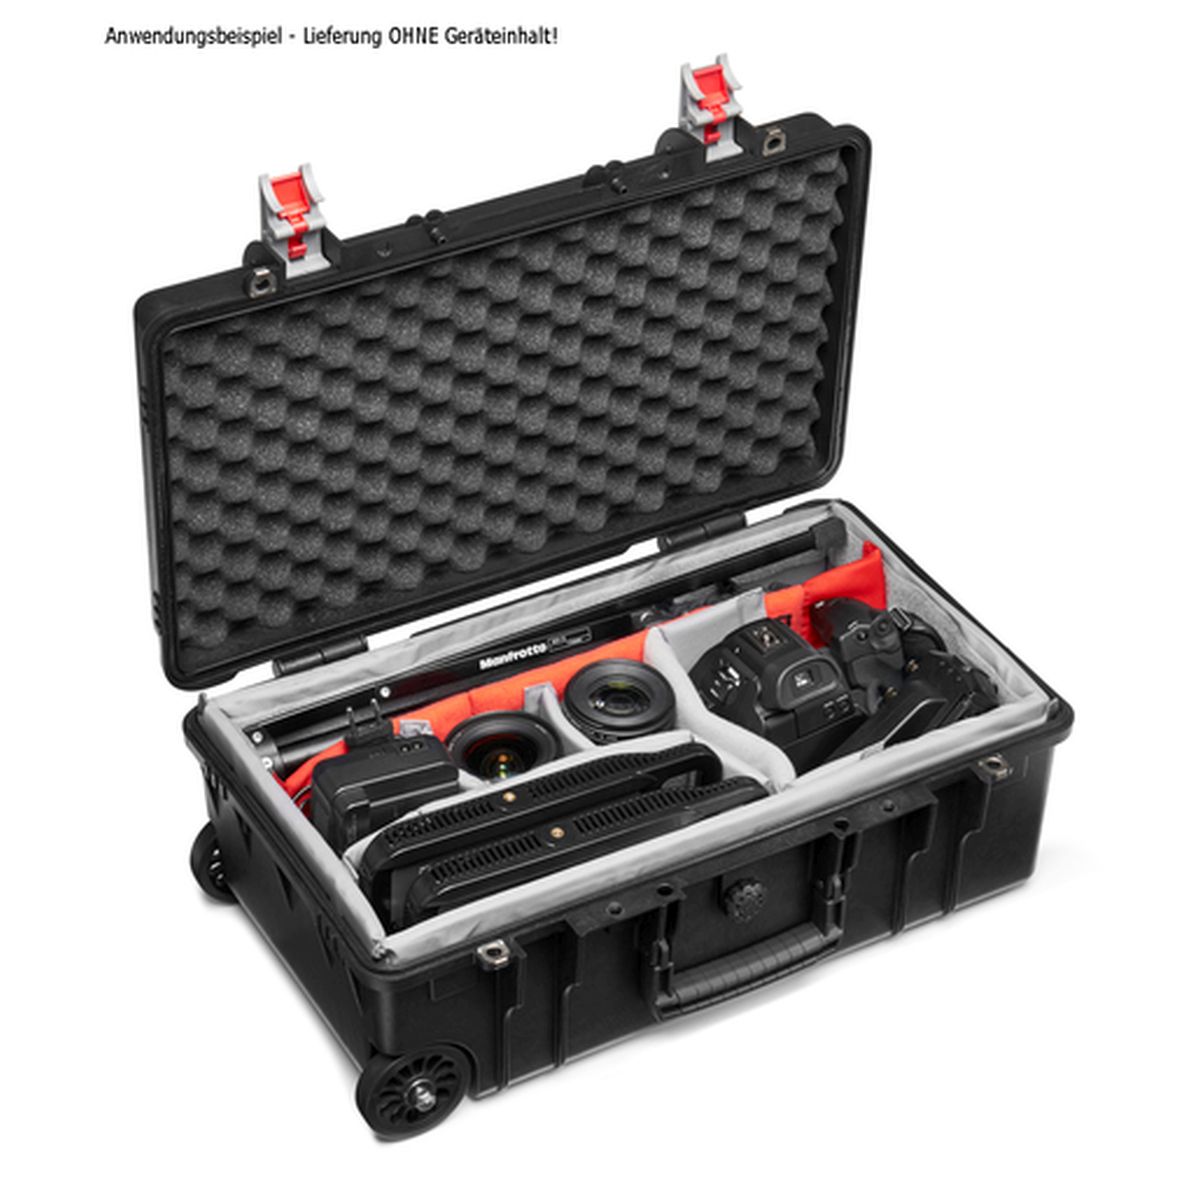 Manfrotto PRO Light Tough-55 Trolley br. Deckel